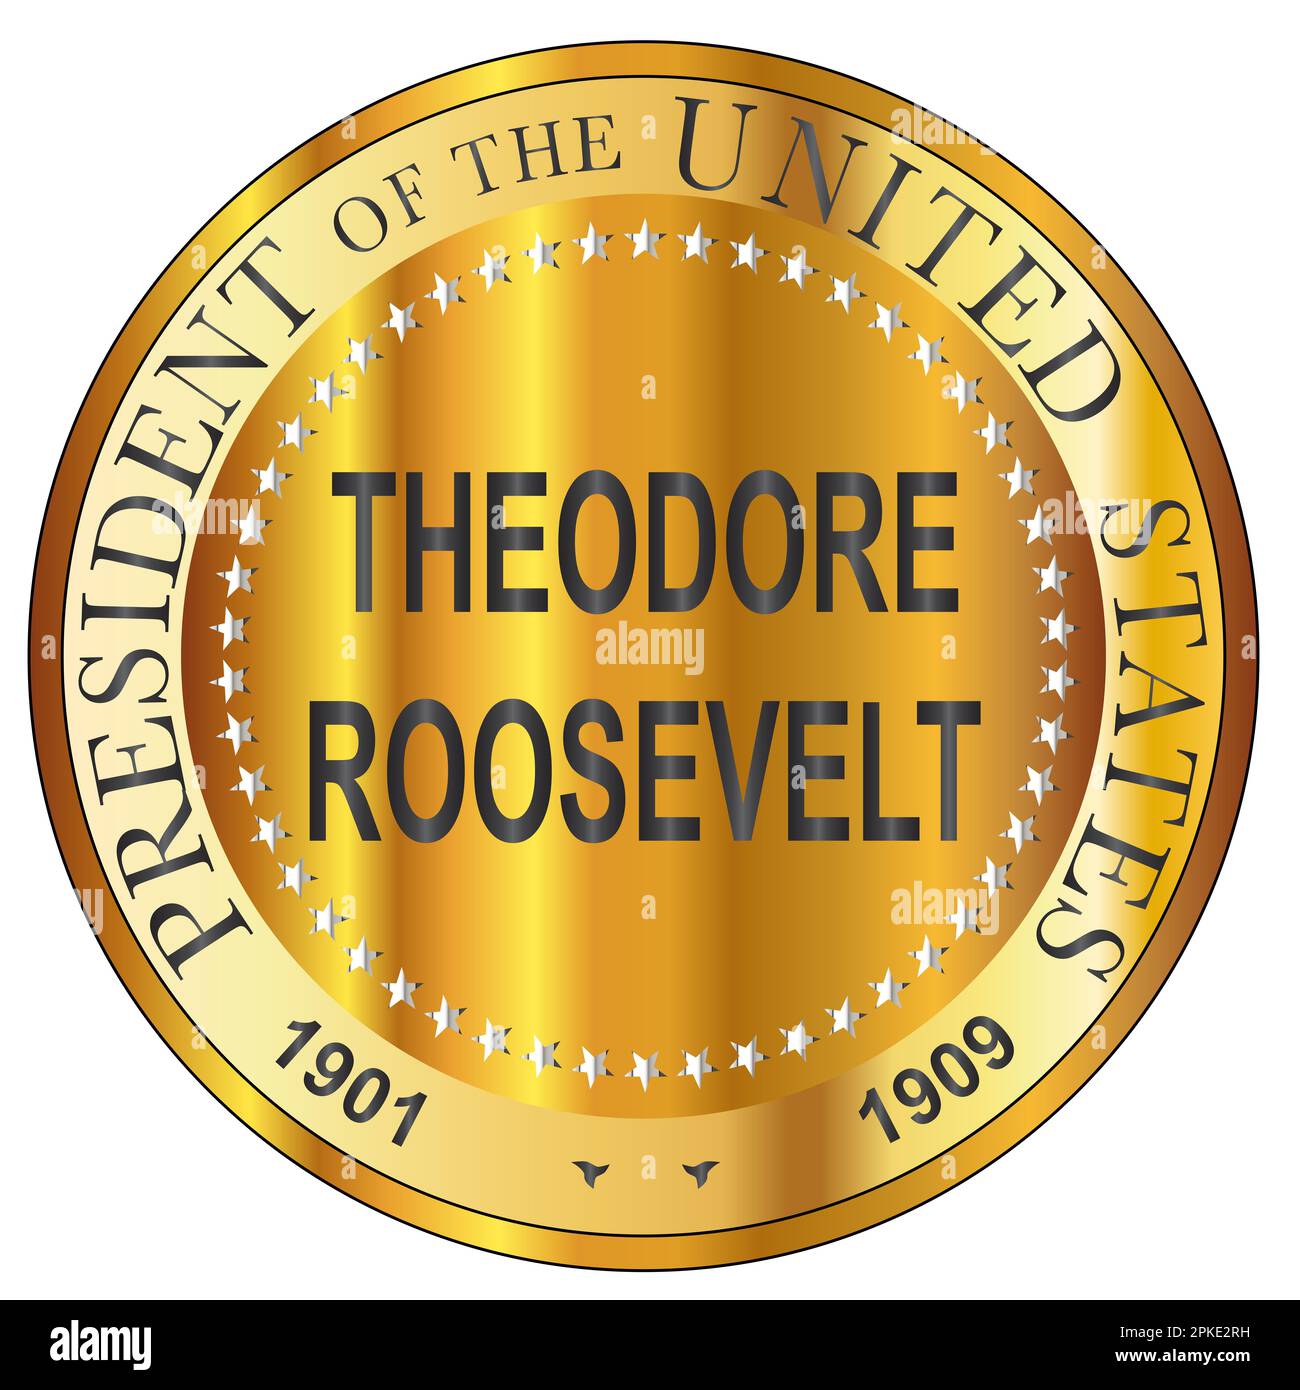 Theodore Roosevelt president of the United States of America round stamp Stock Photo